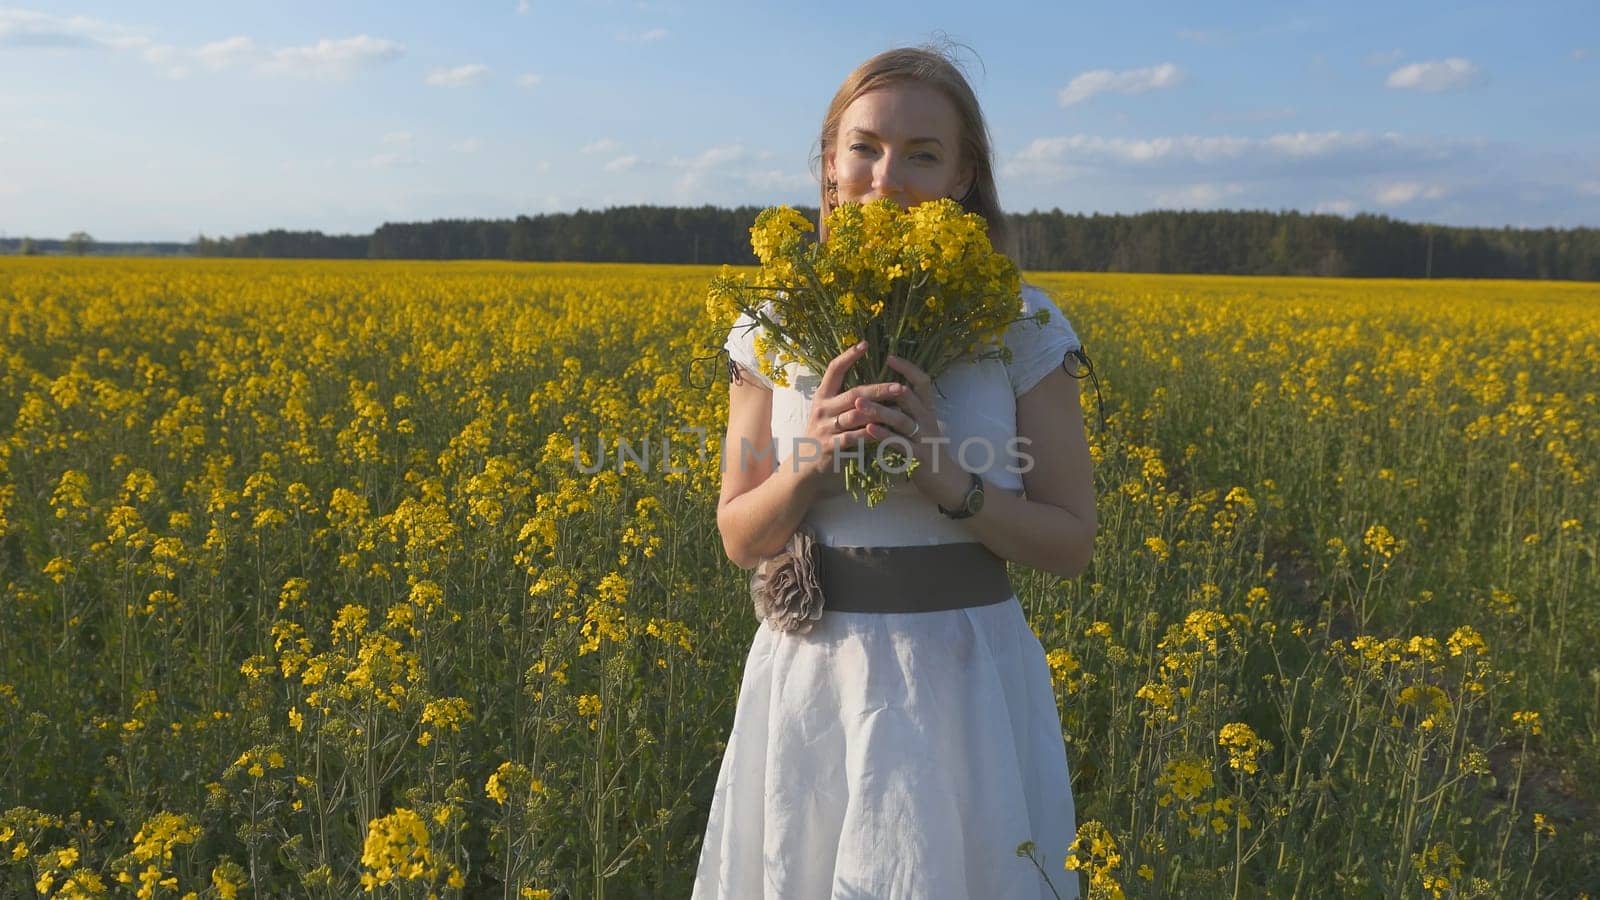 A girl in a white dress is walking among a rapeseed field